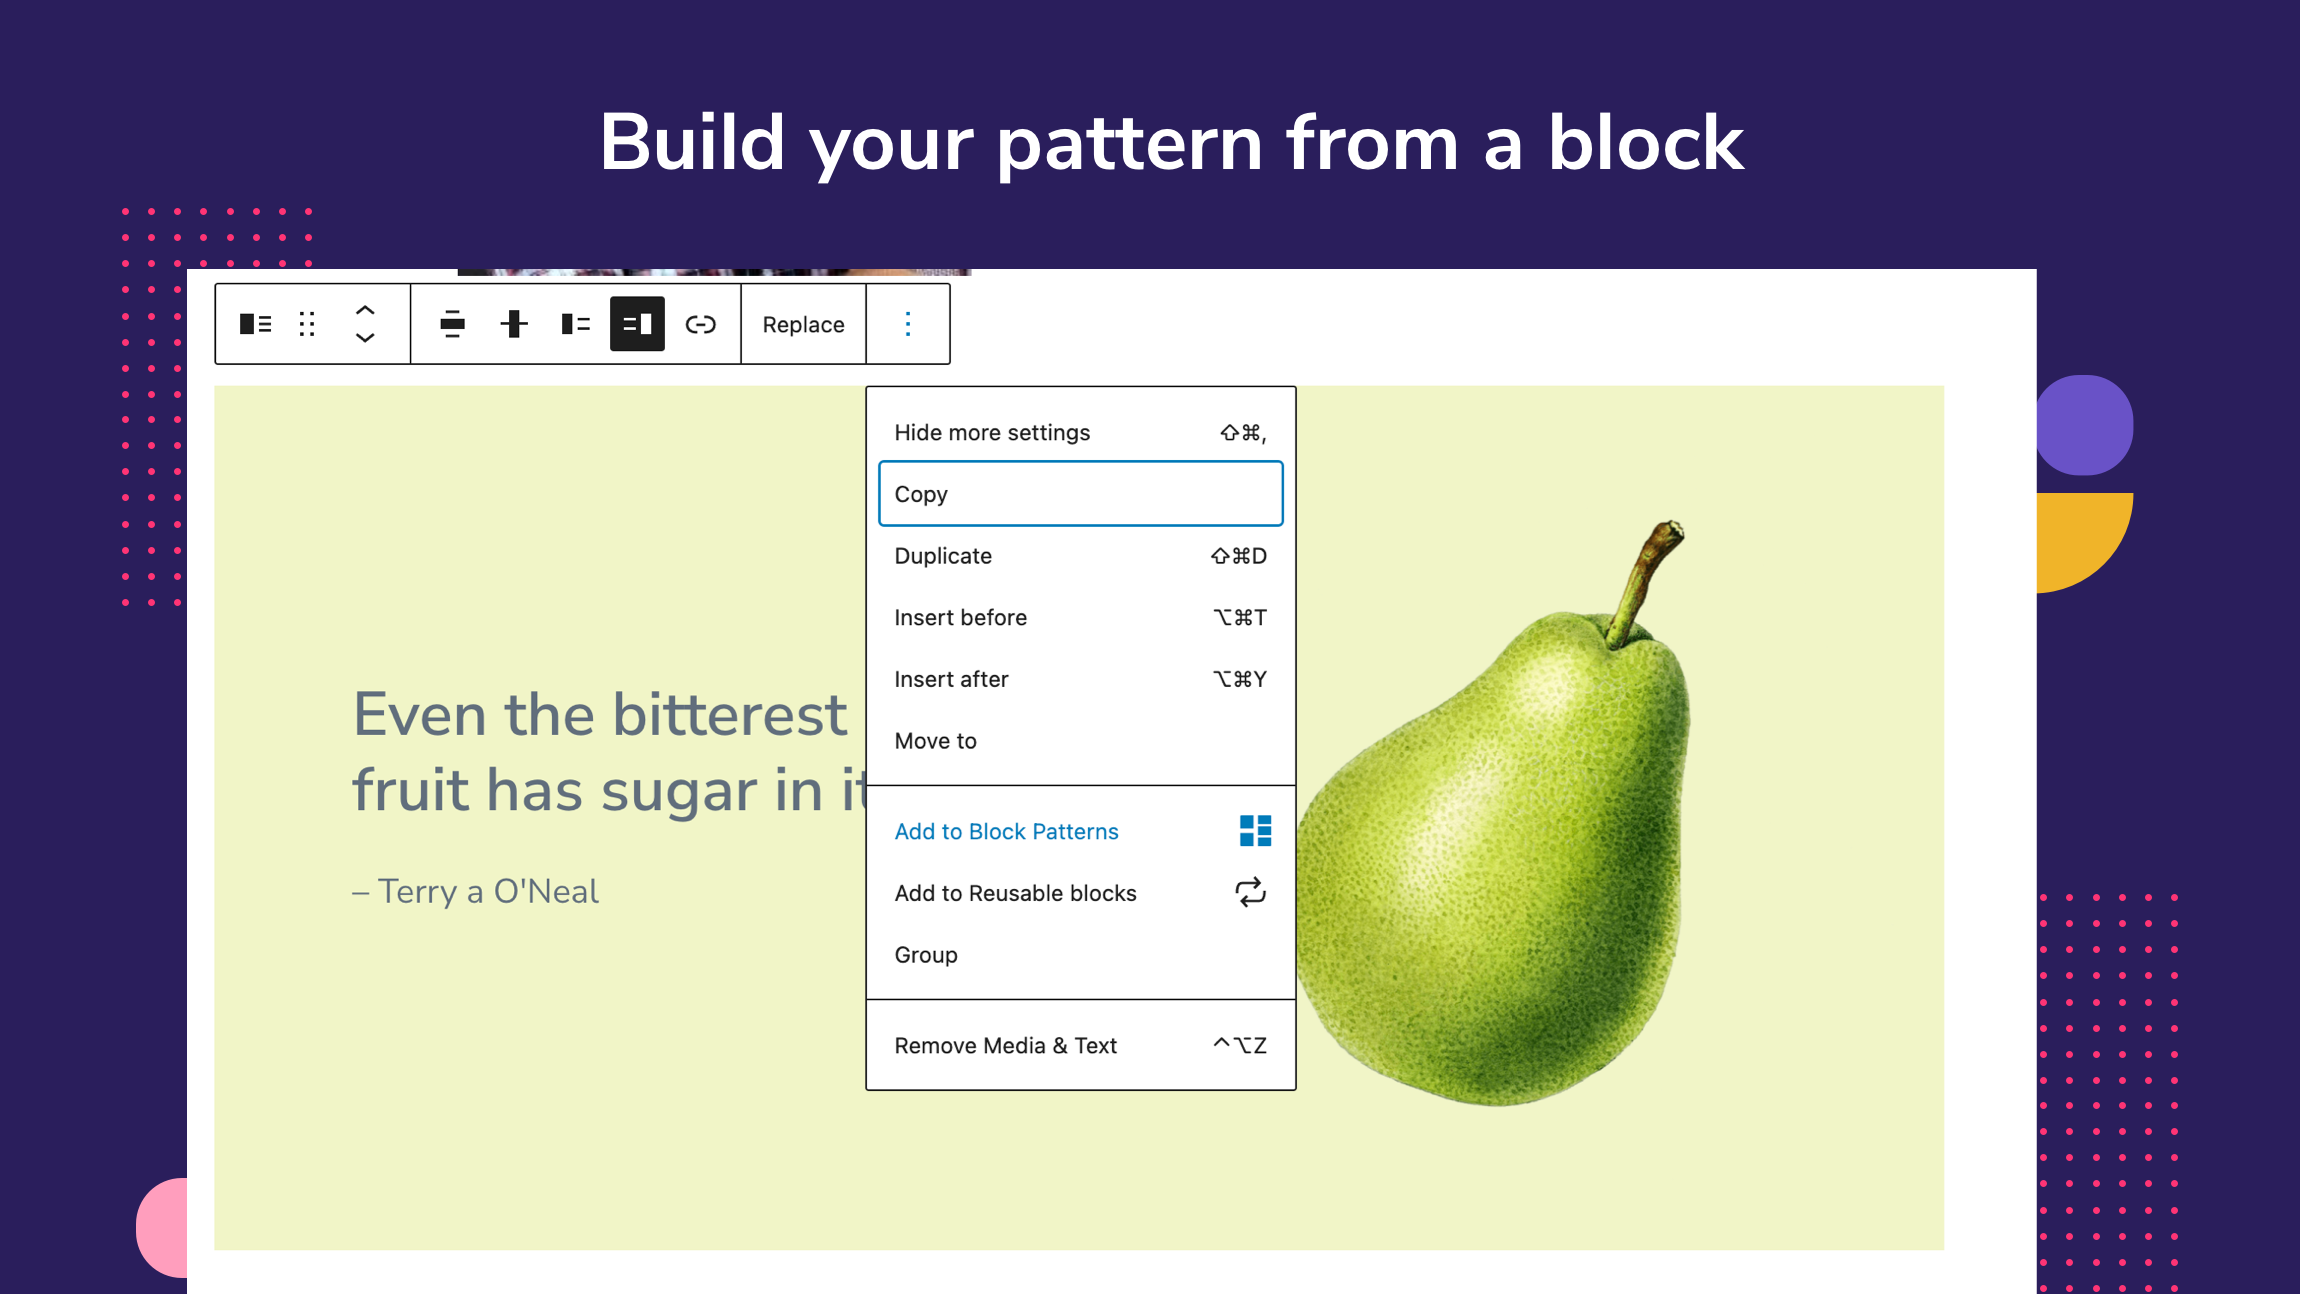 Build your pattern from a block